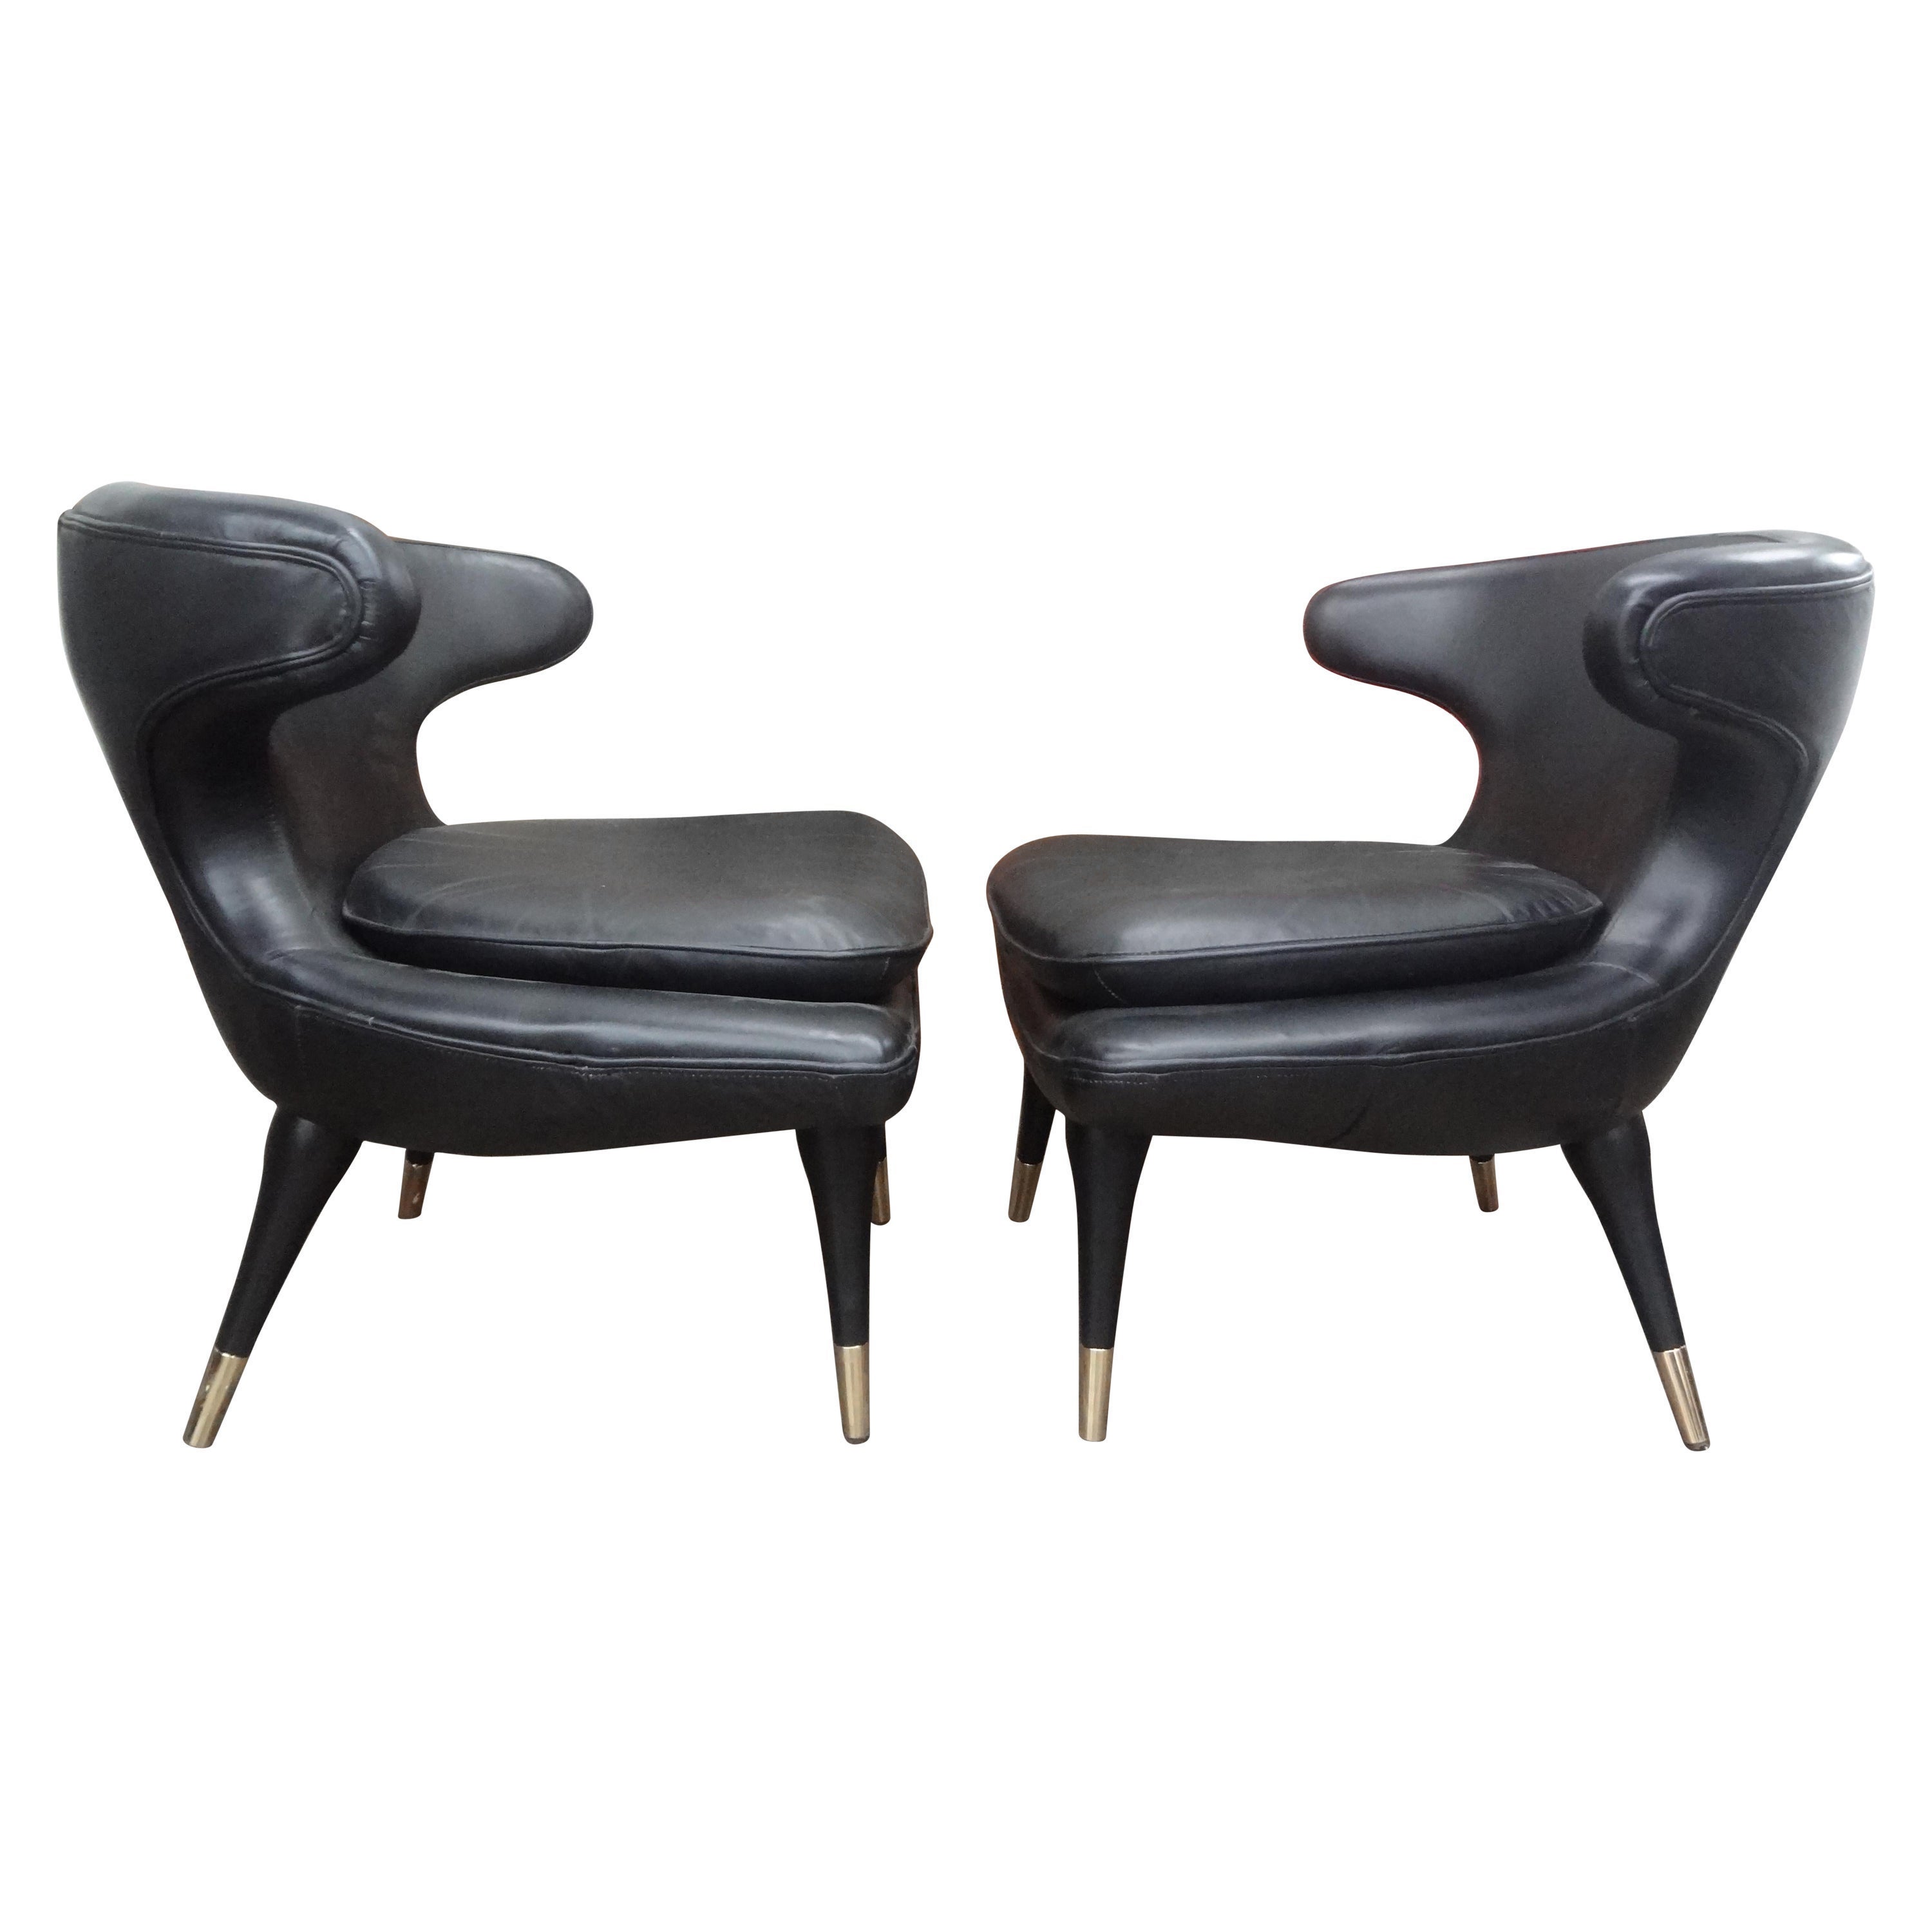 Pair of Italian Modern Curved Back Chairs Upholstered in Black Leather For Sale